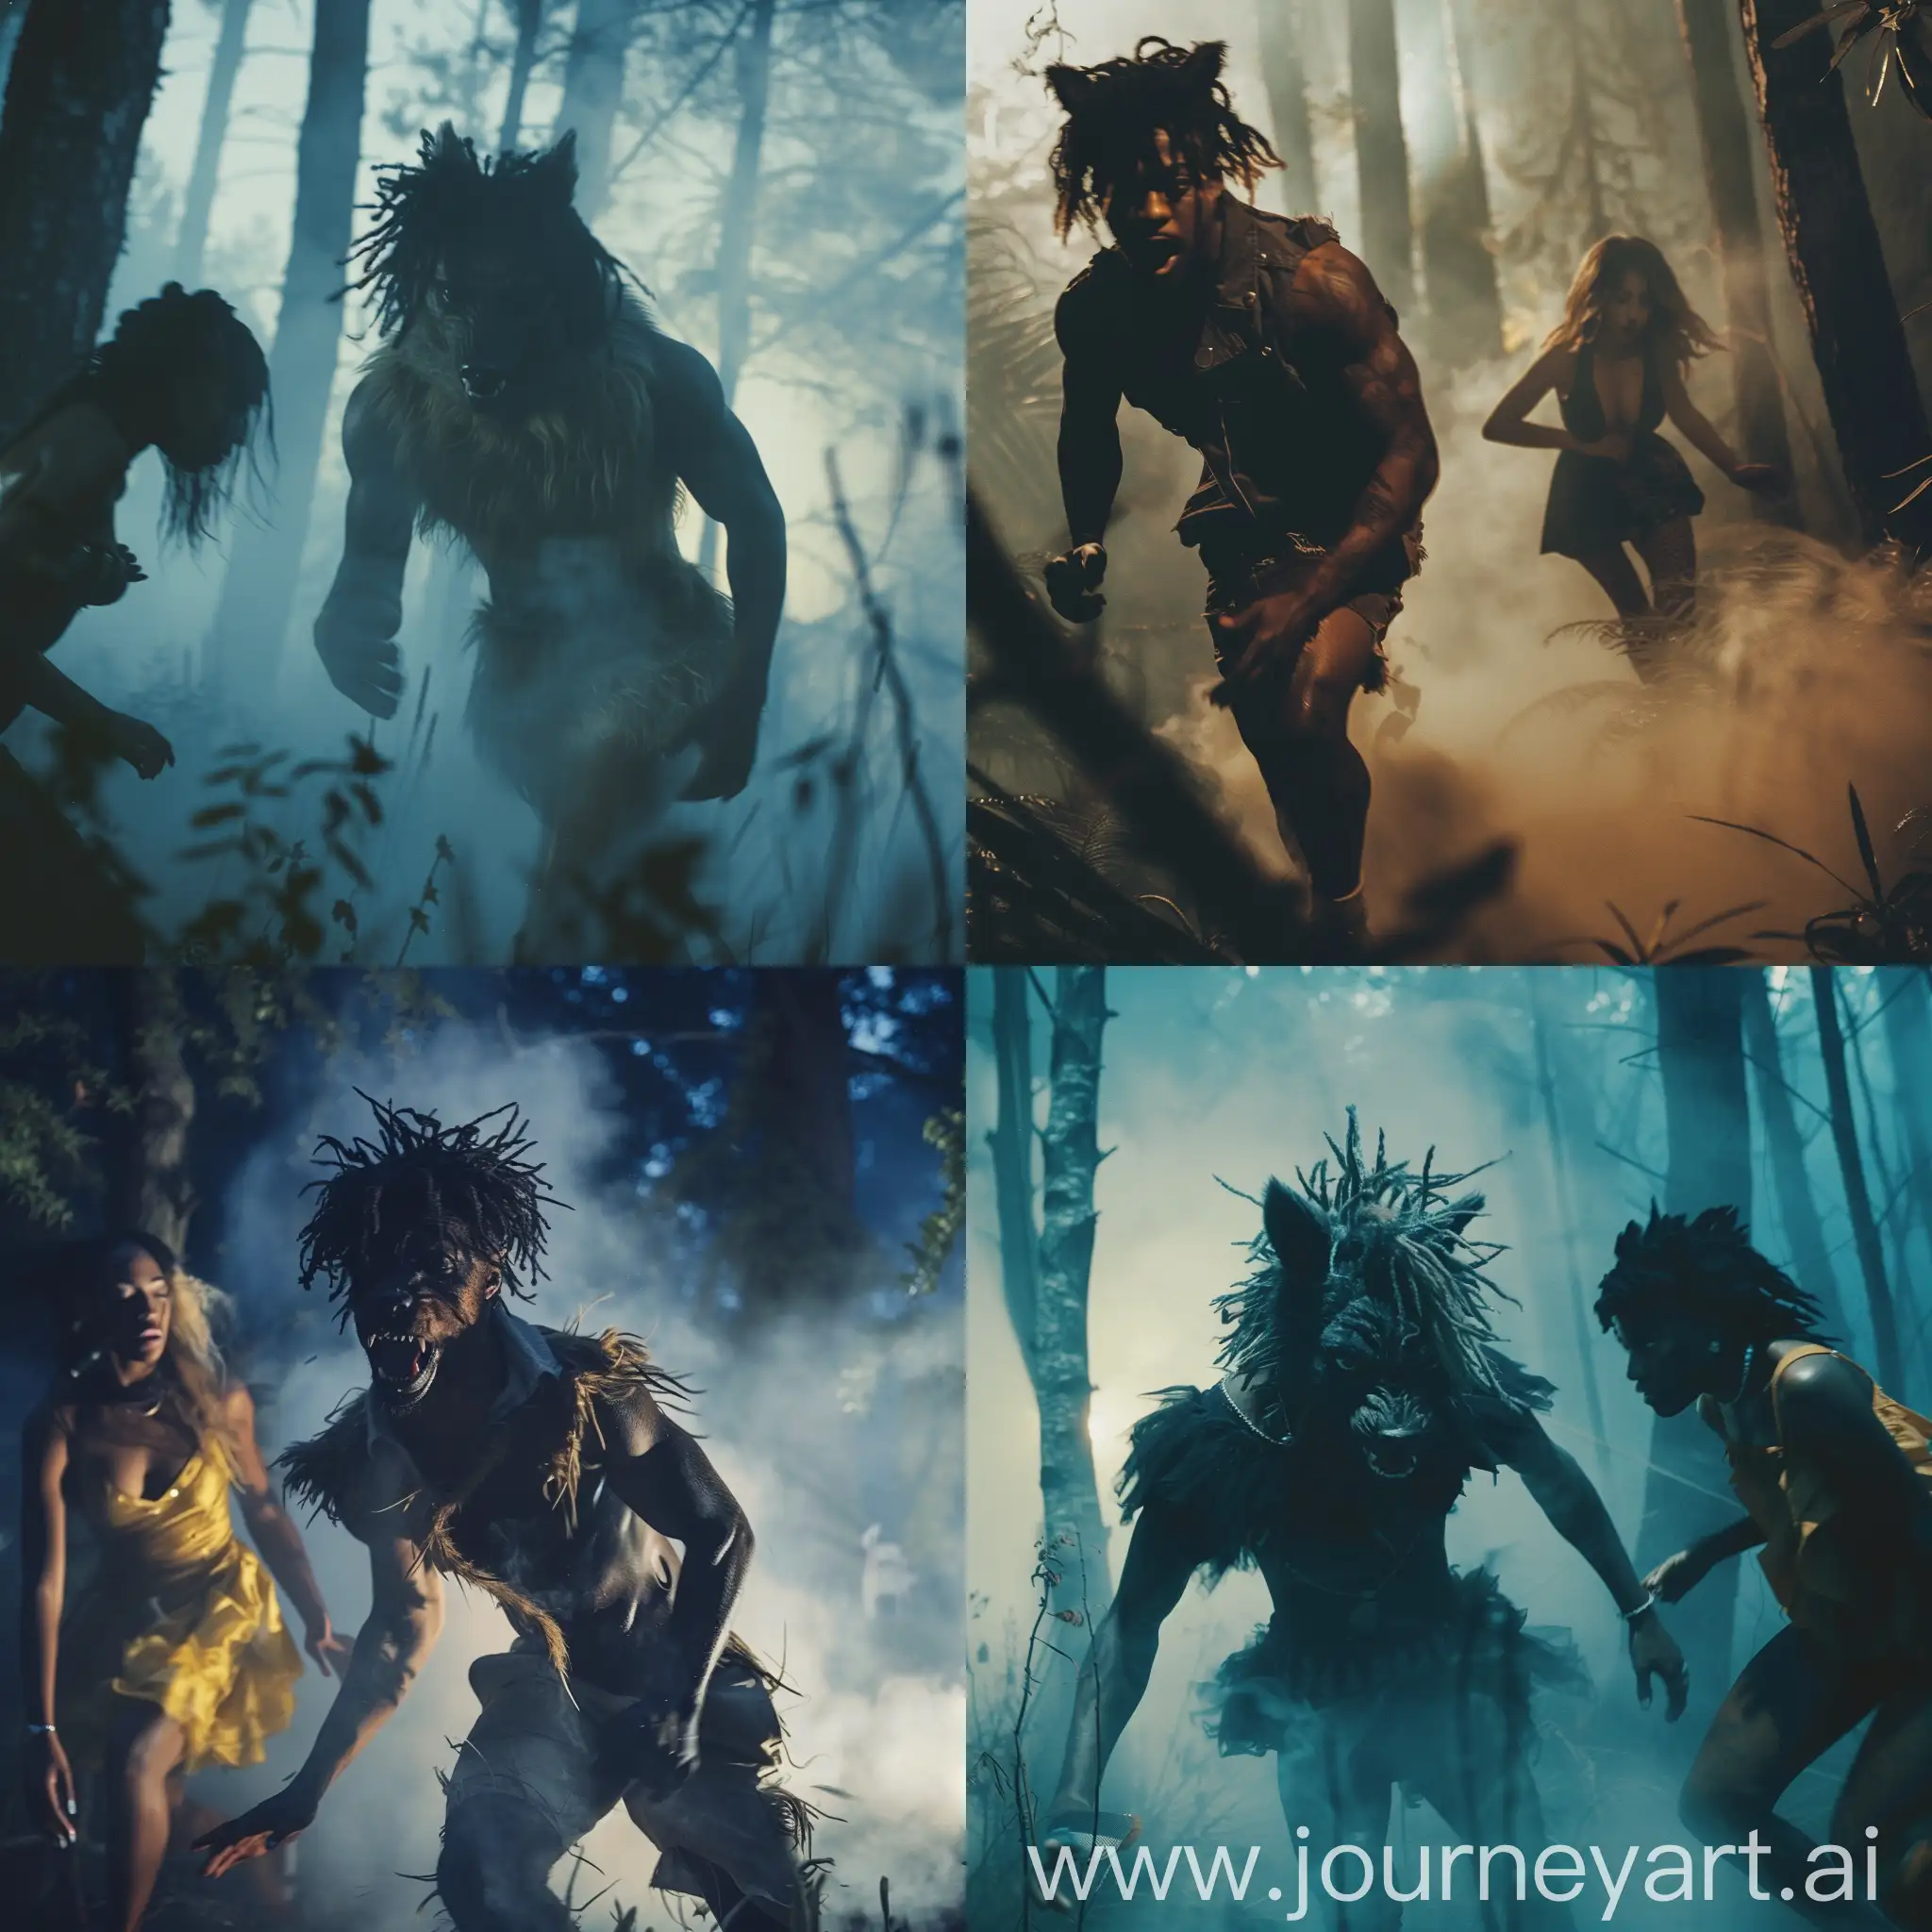 a 1980s Thriller music video,of Juice Wrld as a ware wolf,in a smokey forest,chasing a young woman.